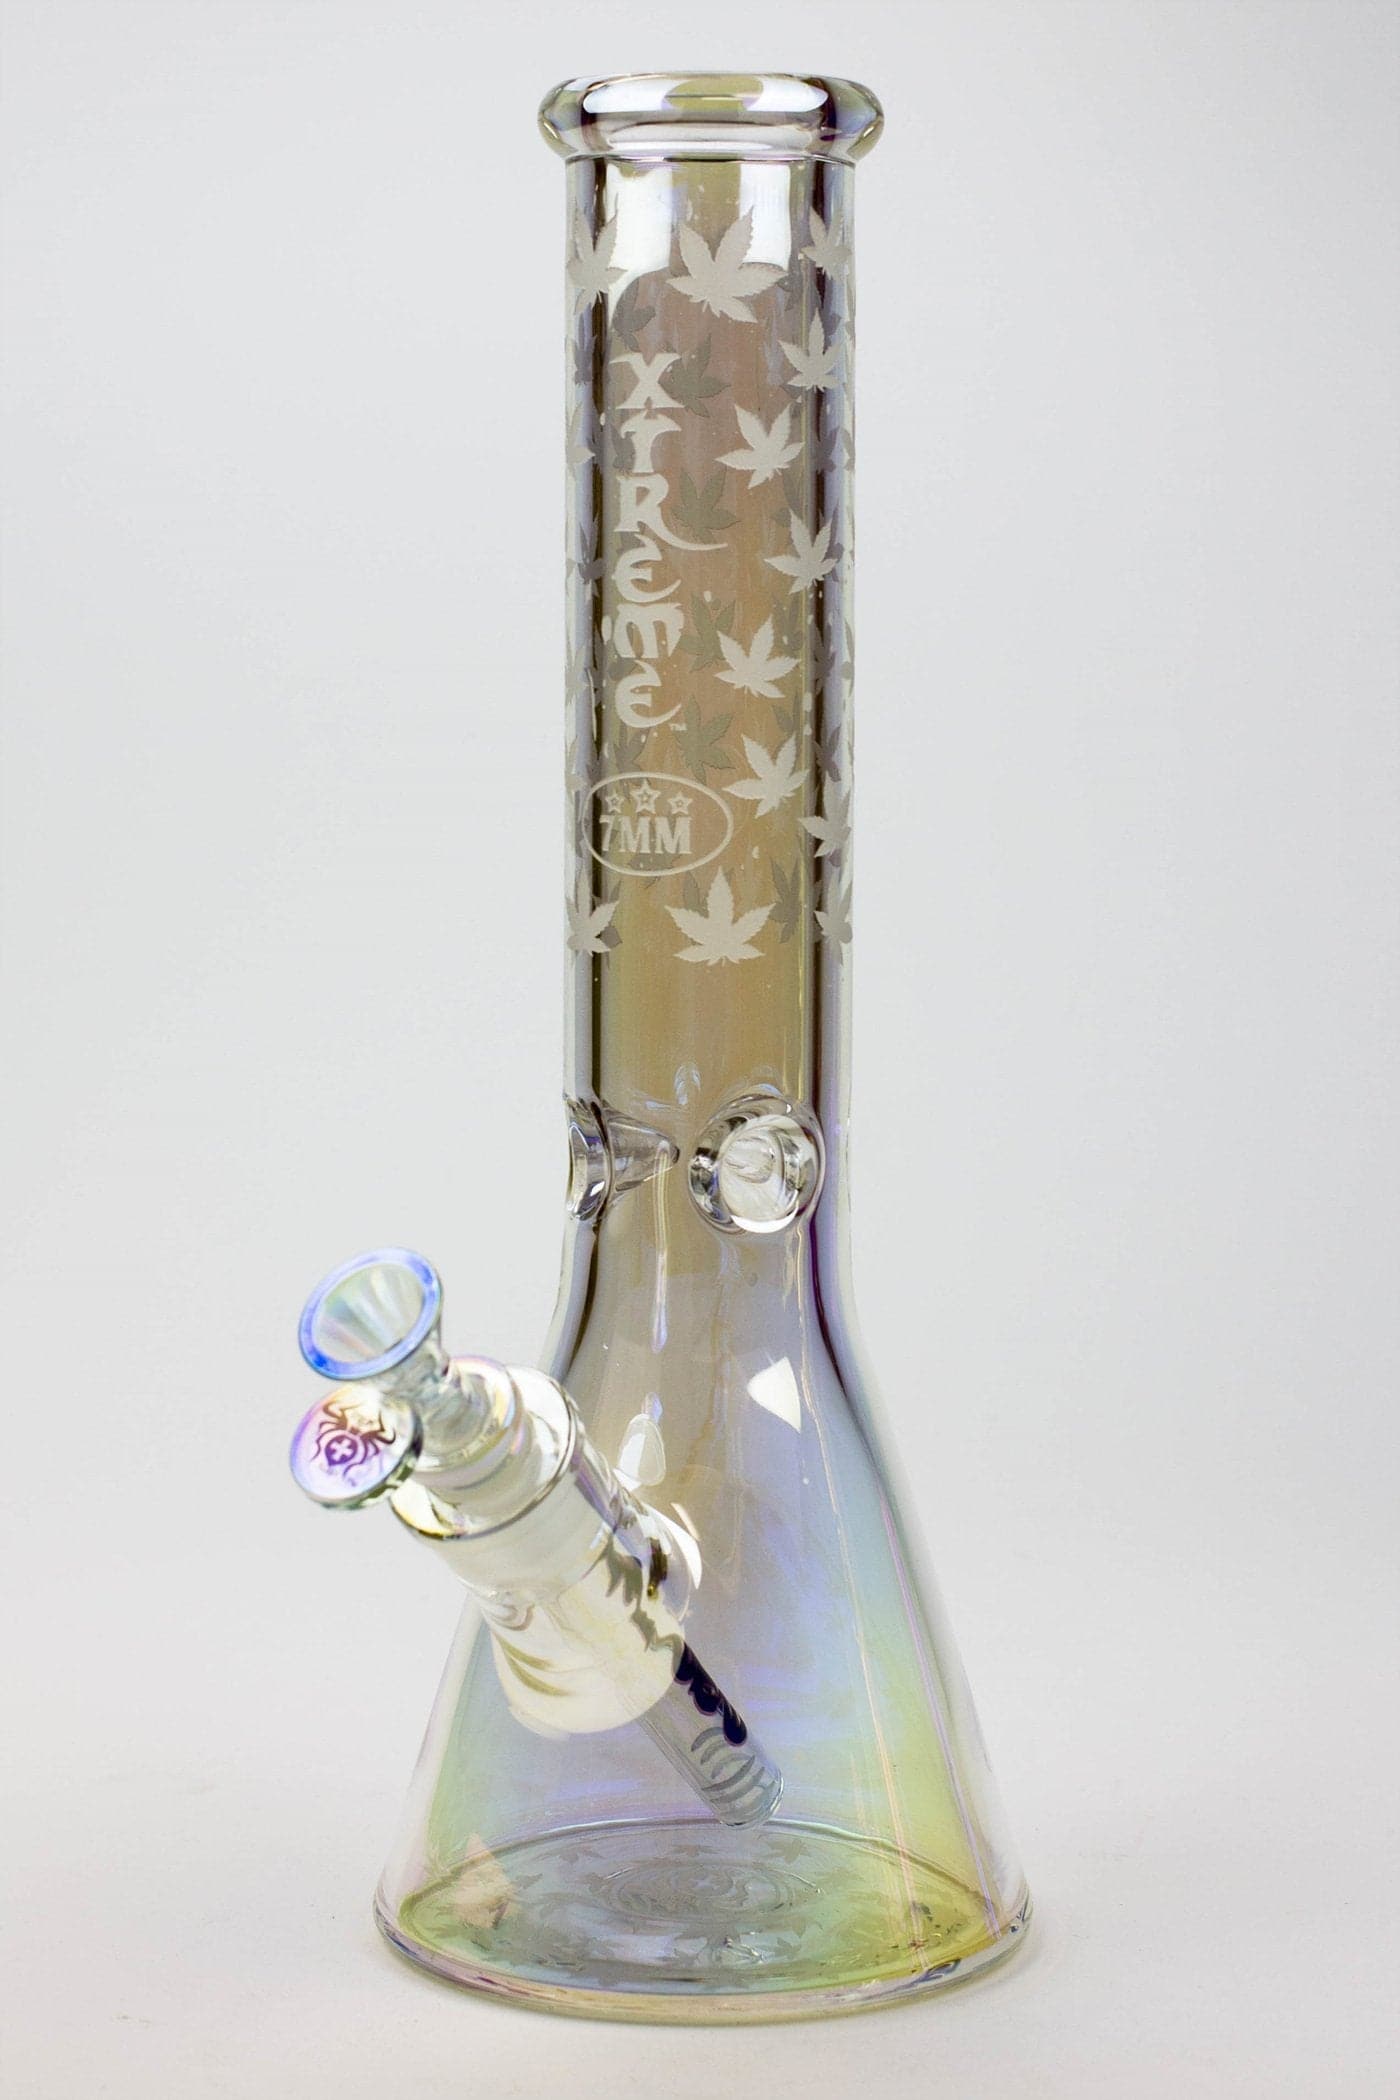 Xtreme glass electroplated glass beaker water pipes_4